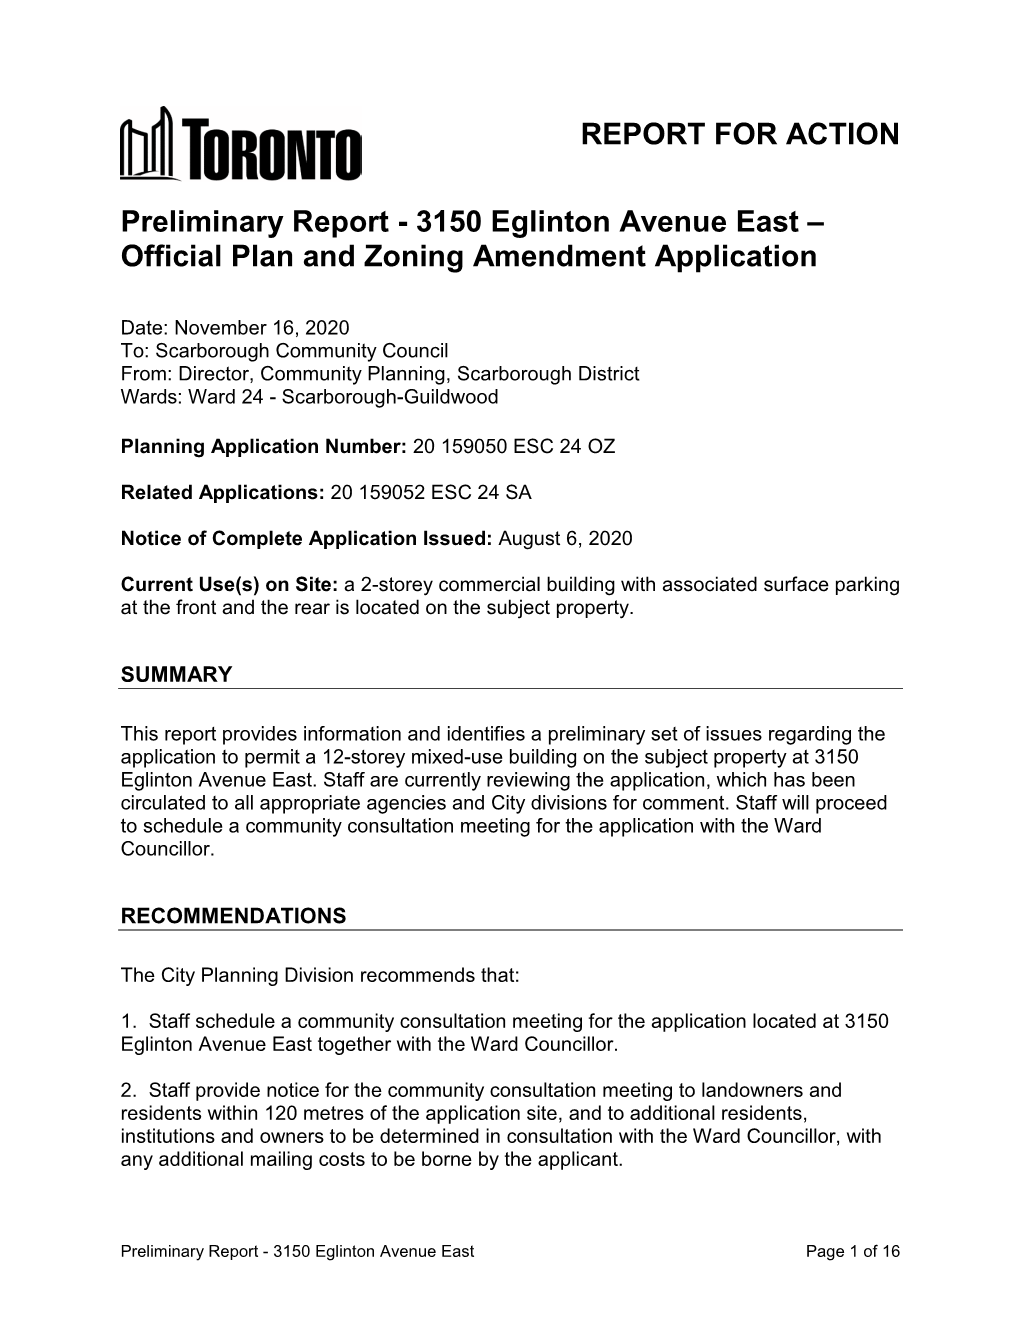 Preliminary Report - 3150 Eglinton Avenue East – Official Plan and Zoning Amendment Application